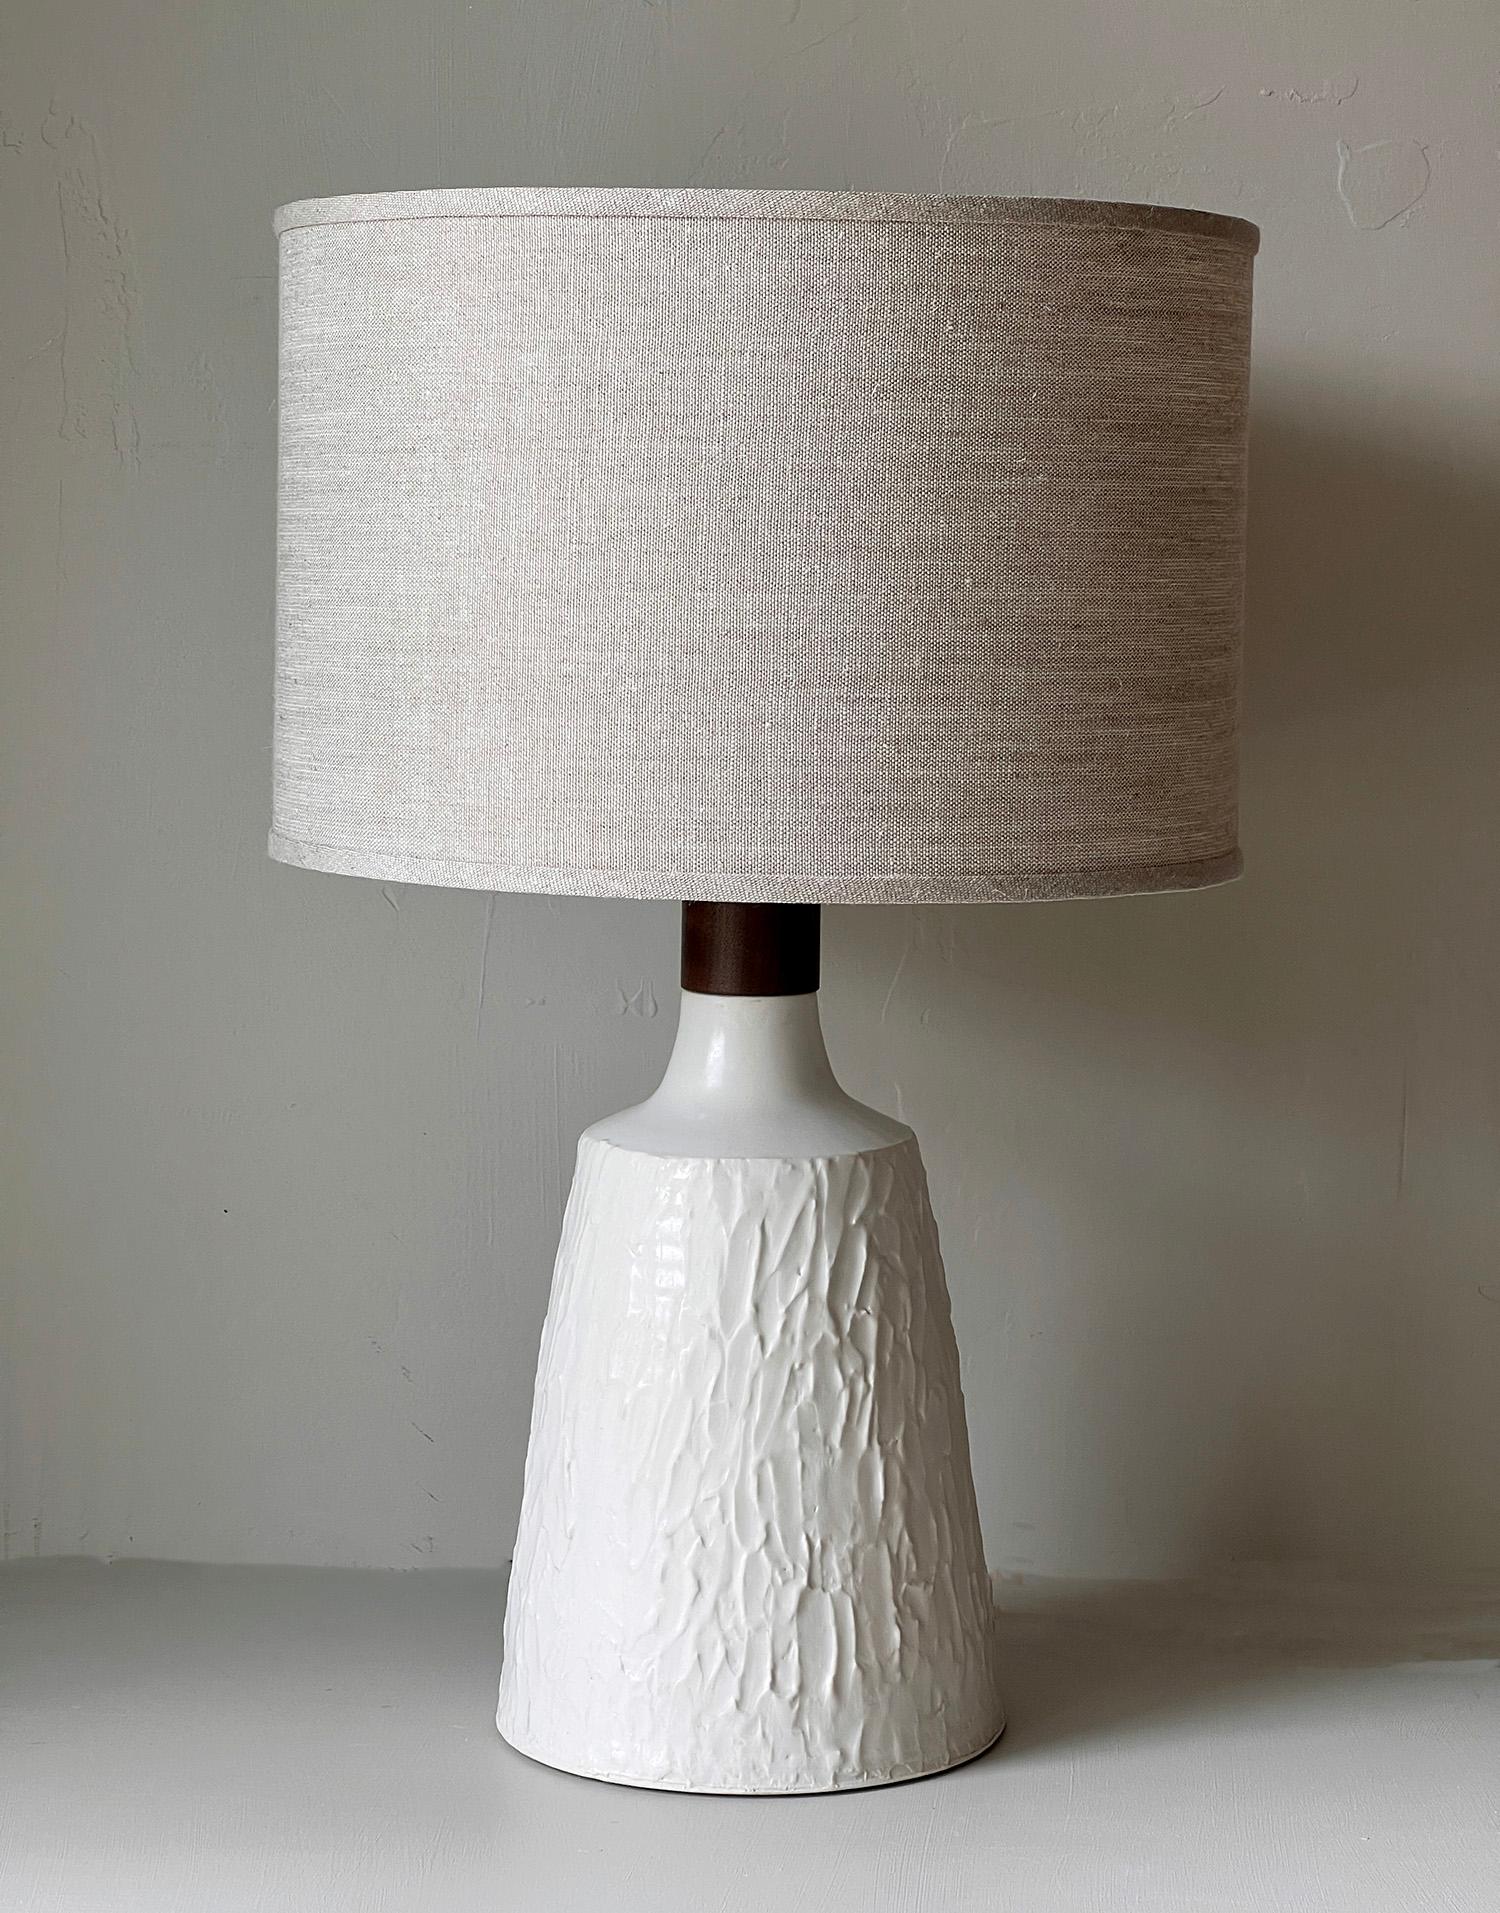 This one of a kind porcelain and walnut table lamp combines the warmth of wood with cool porcelain. Created as a collaboration between husband and wife creative partners, Daniel Oates and Dana Brandwein. The base was thrown by hand on the potter's